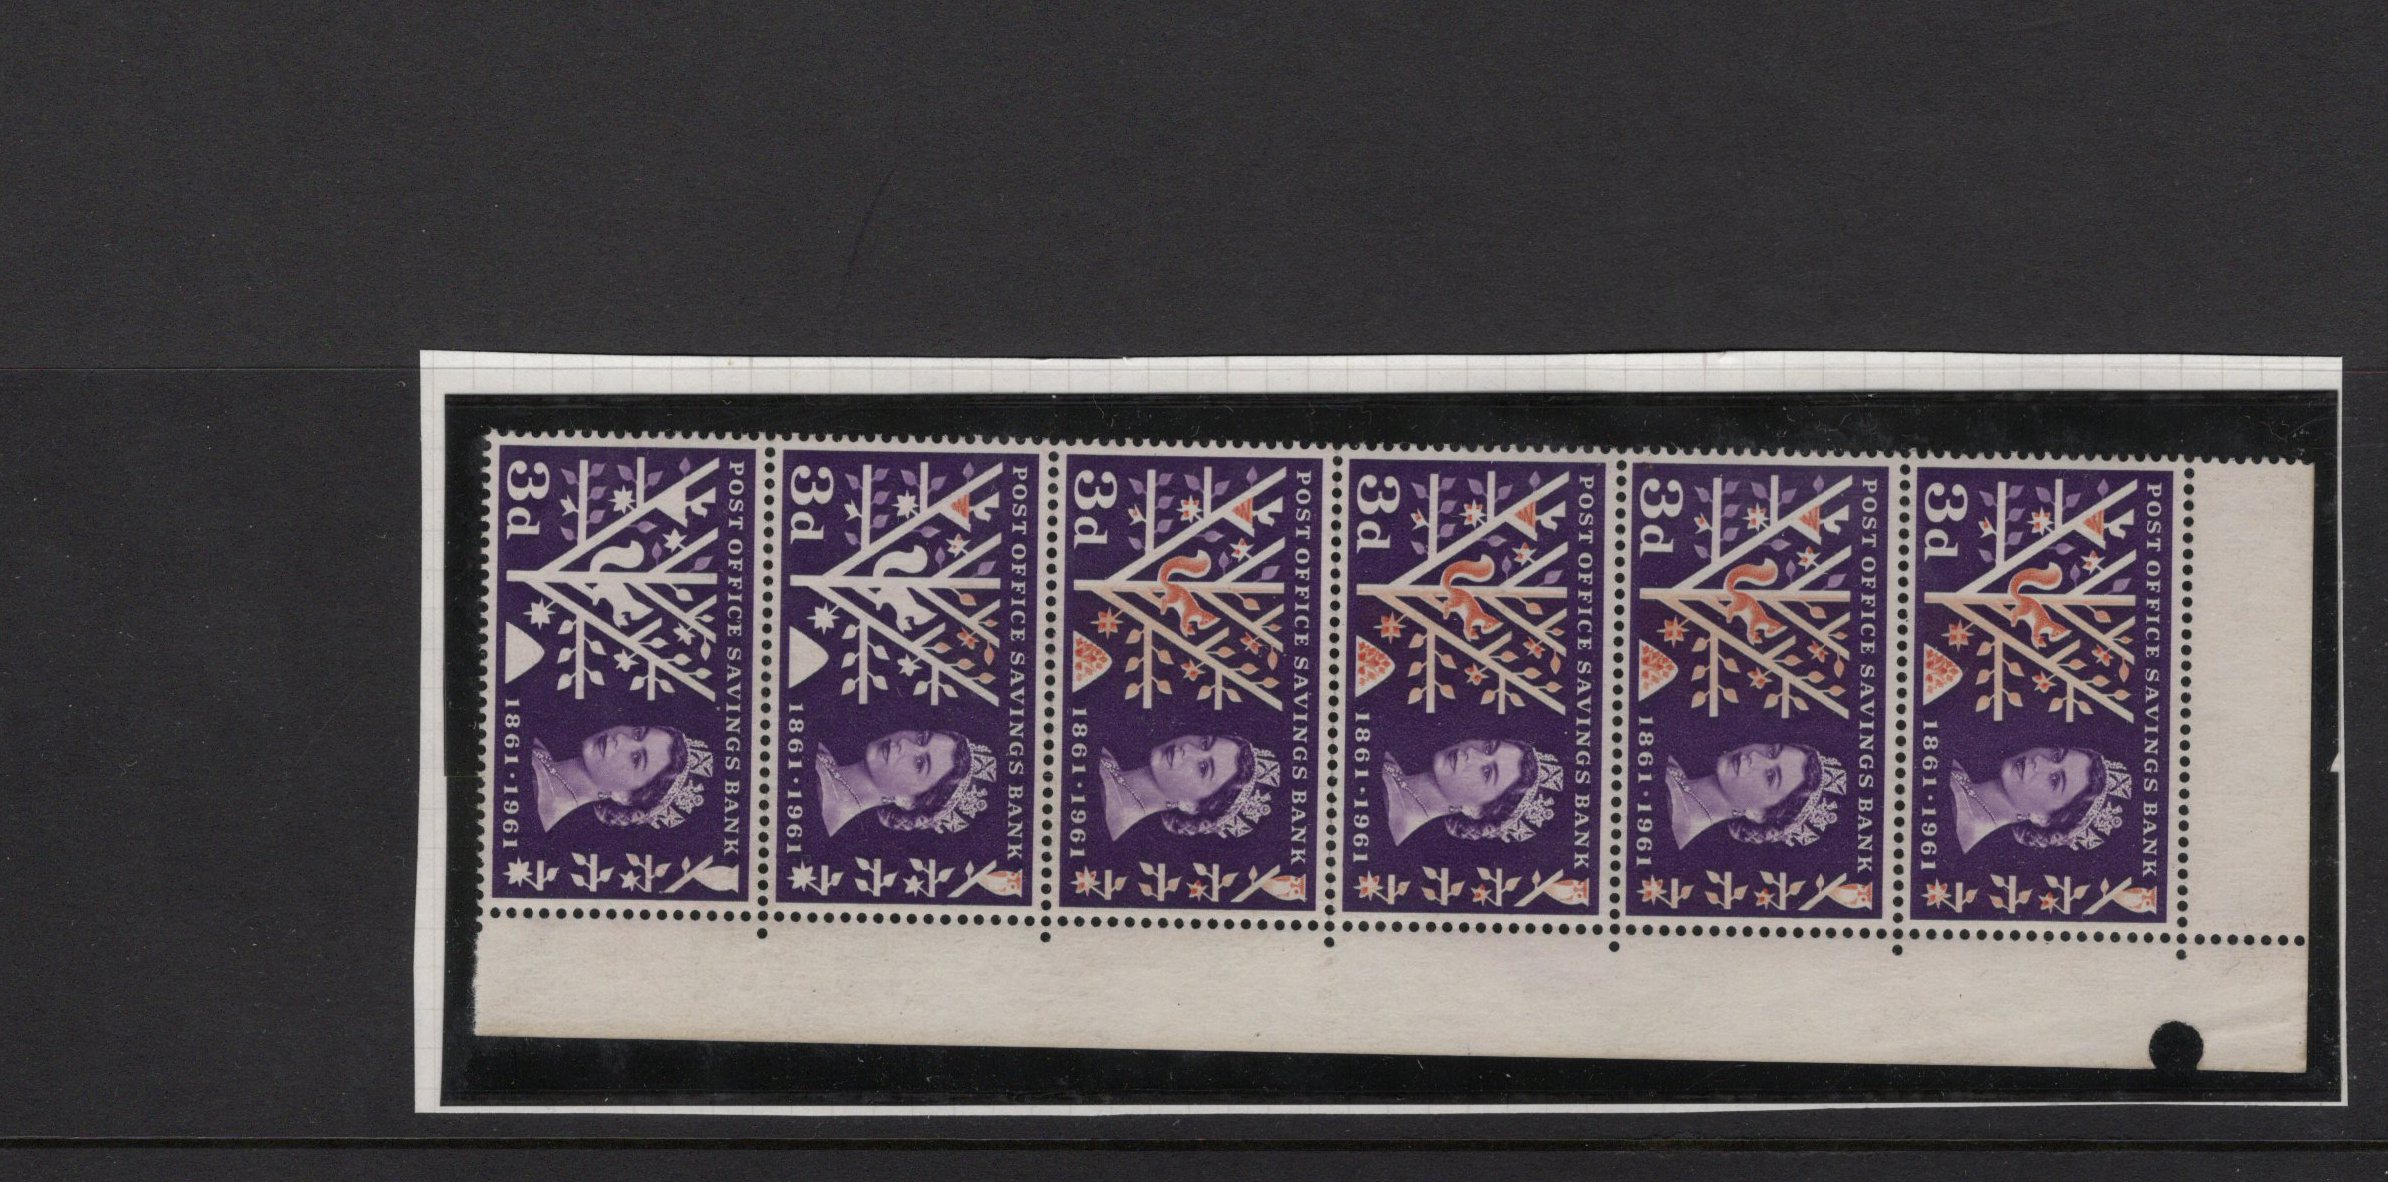 GB - Errors - 1961 POSB 3d SG624A with orange brown fading to last stamps resulting in missing